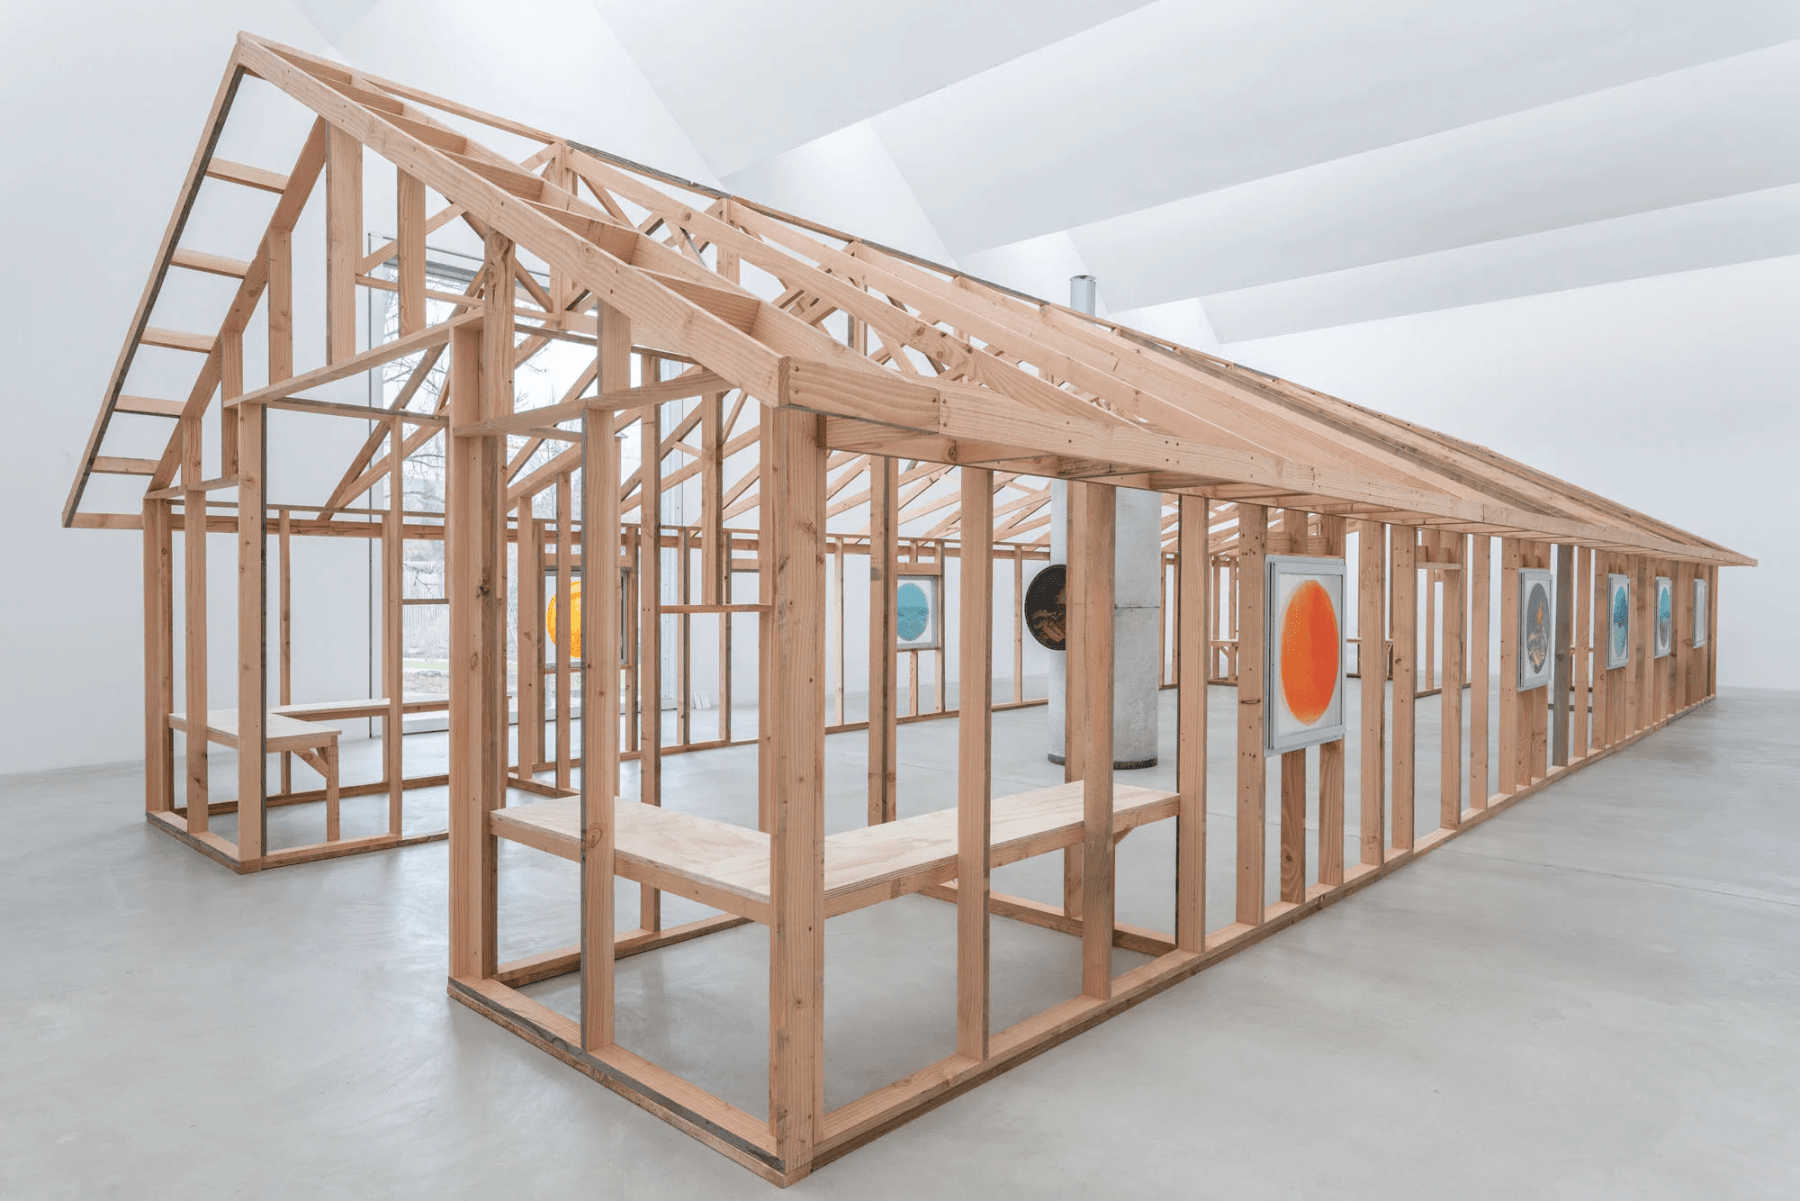 Gallery installation of the frames of a building with pitched roof